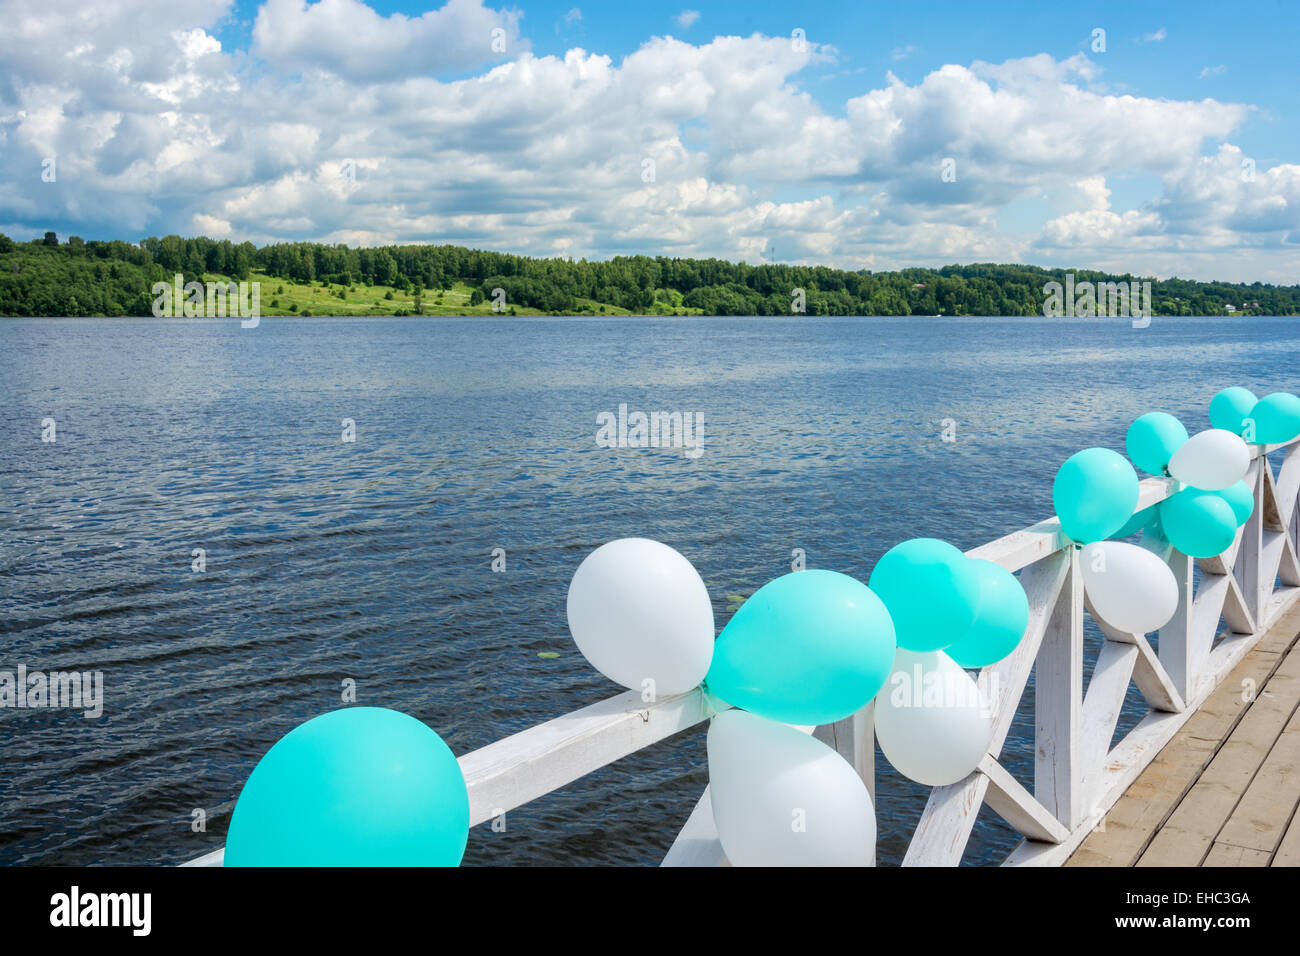 The embankment of the river Volga decorated with balloons on a Sunny day. Stock Photo